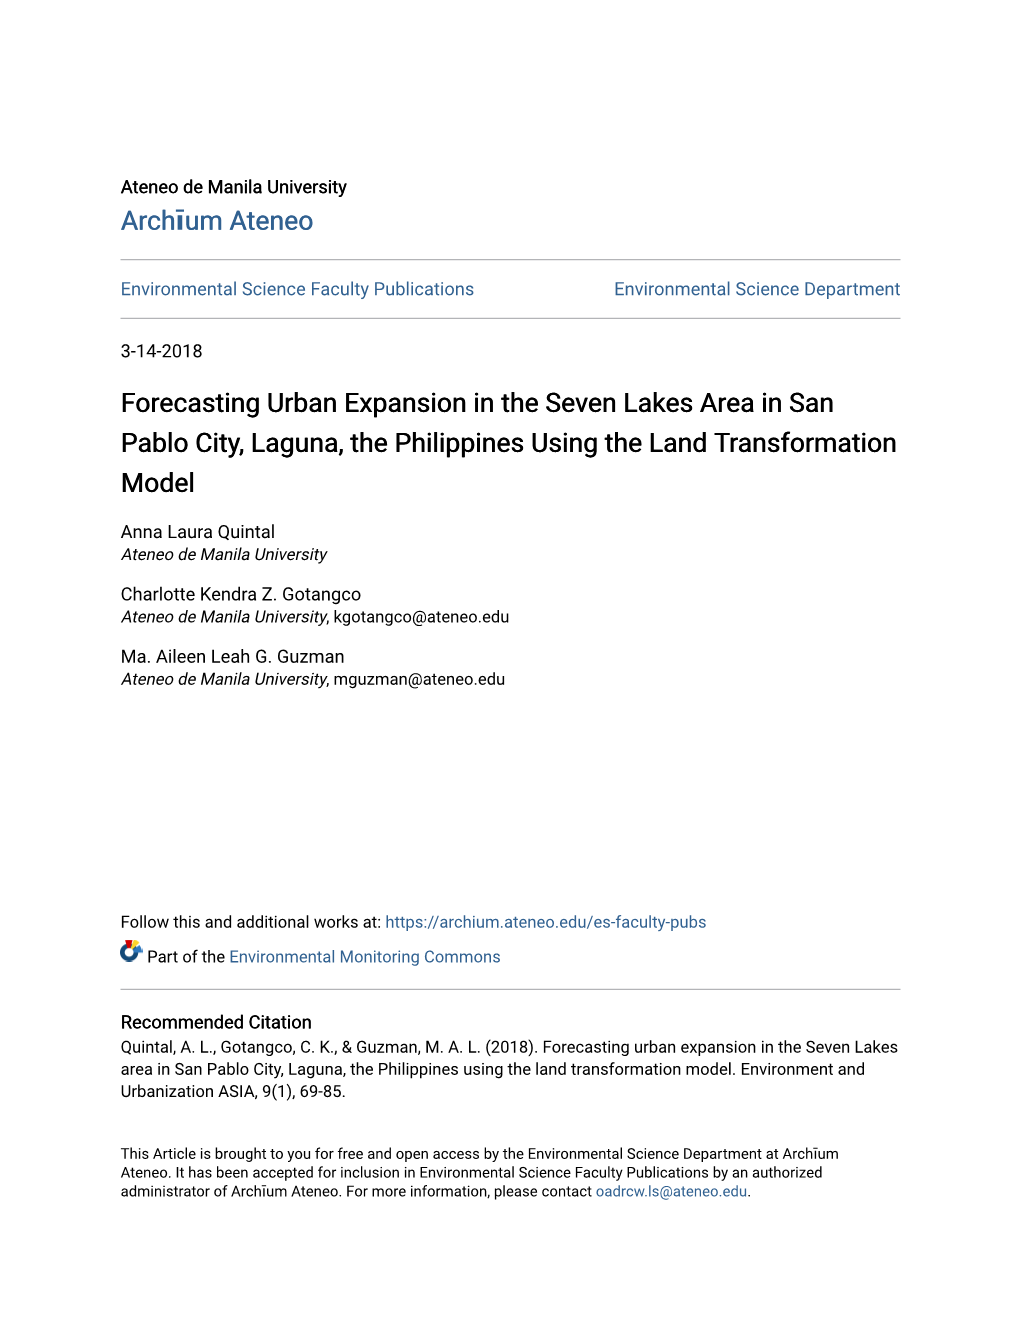 Forecasting Urban Expansion in the Seven Lakes Area in San Pablo City, Laguna, the Philippines Using the Land Transformation Model